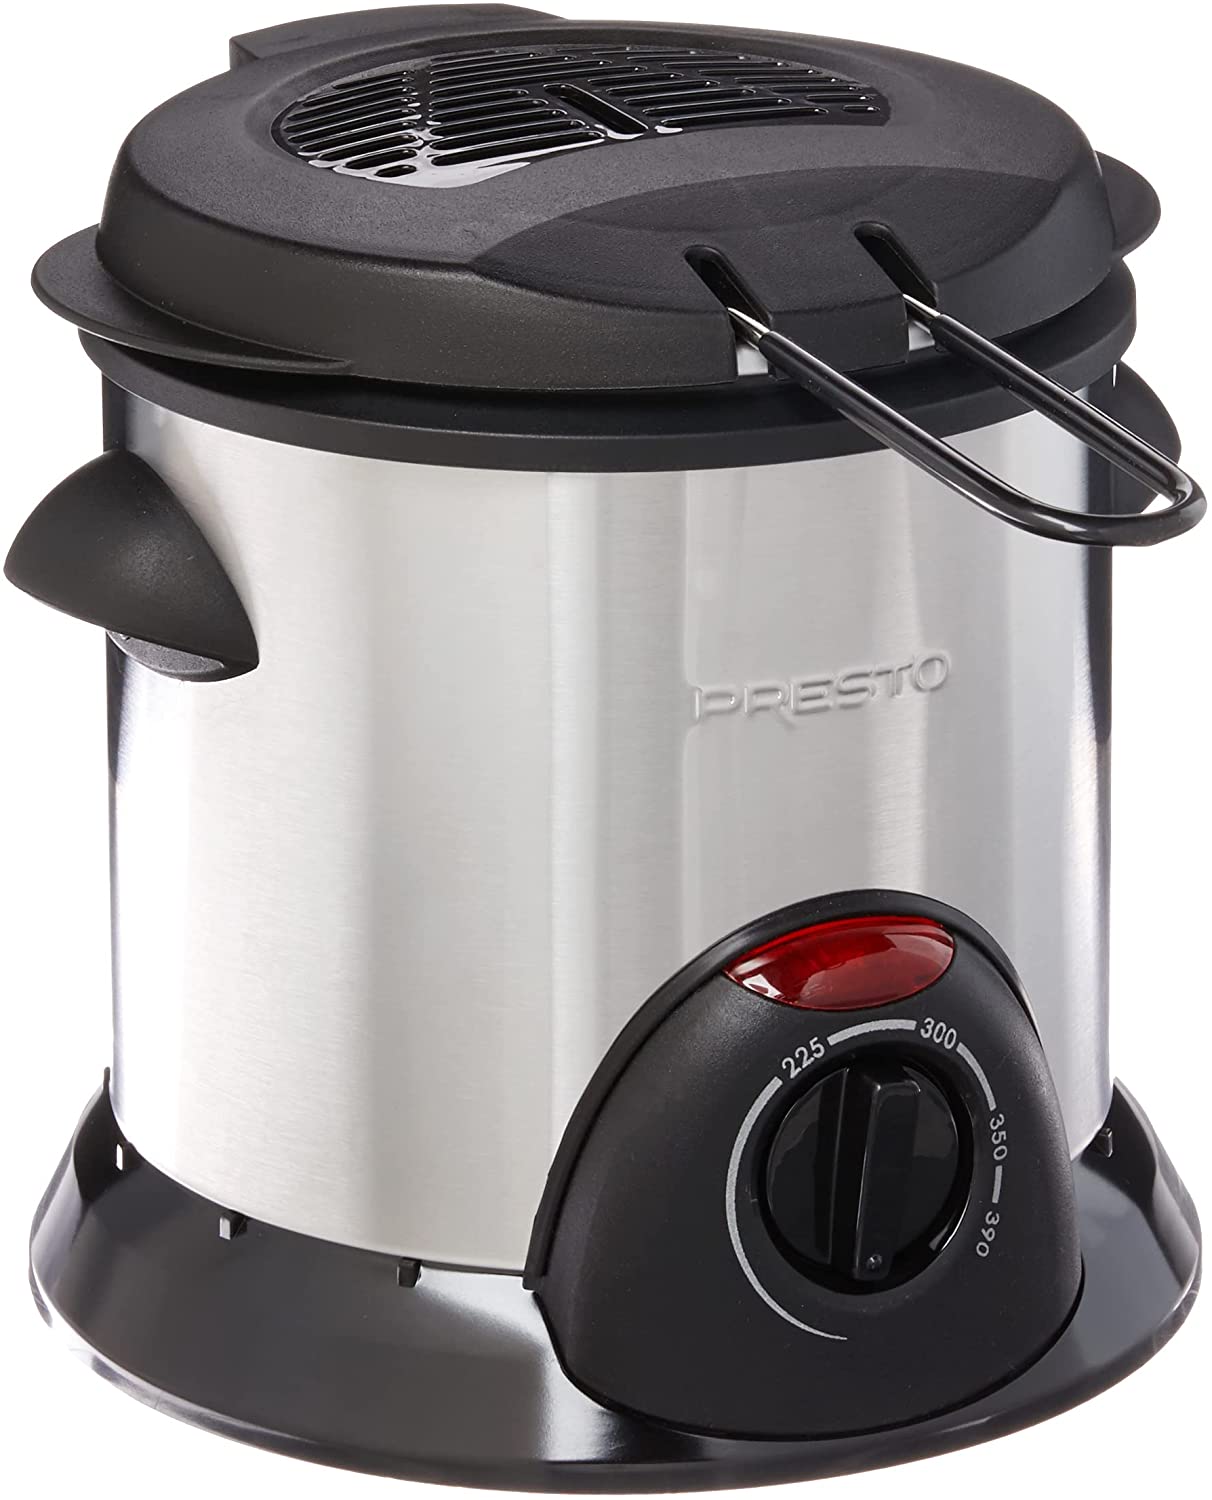 Review of Presto 05470 Stainless Steel Electric Deep Fryer, Silver